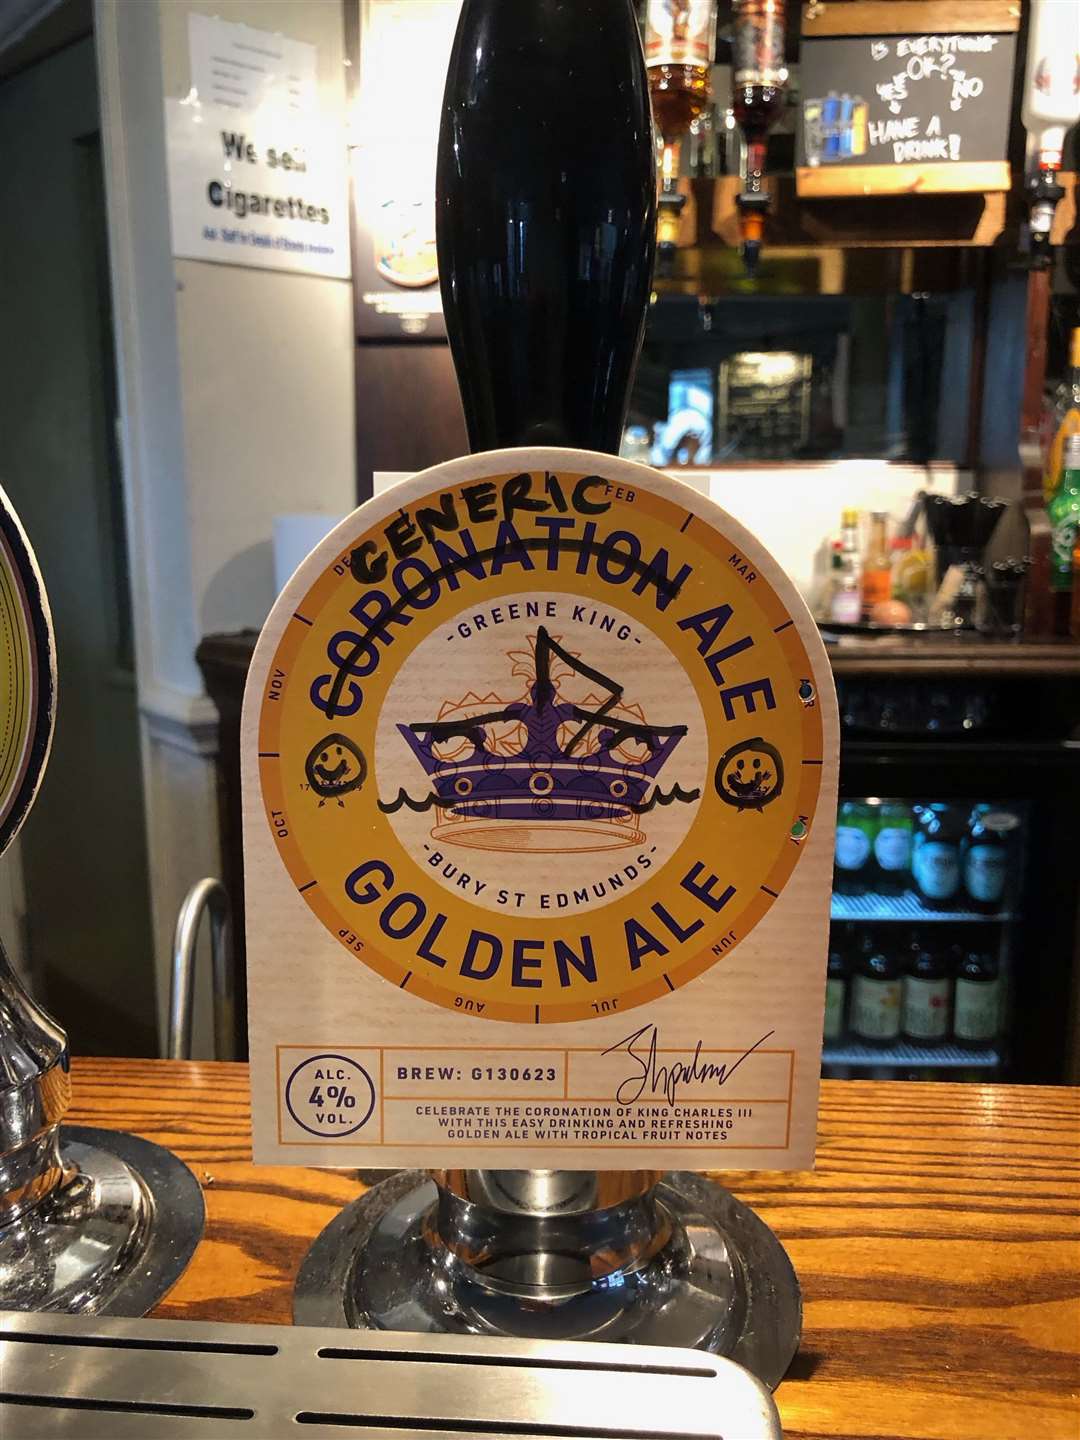 ‘Generic’ ale on tap at the anti-establishment event (Sir Isaac Newton/PA)